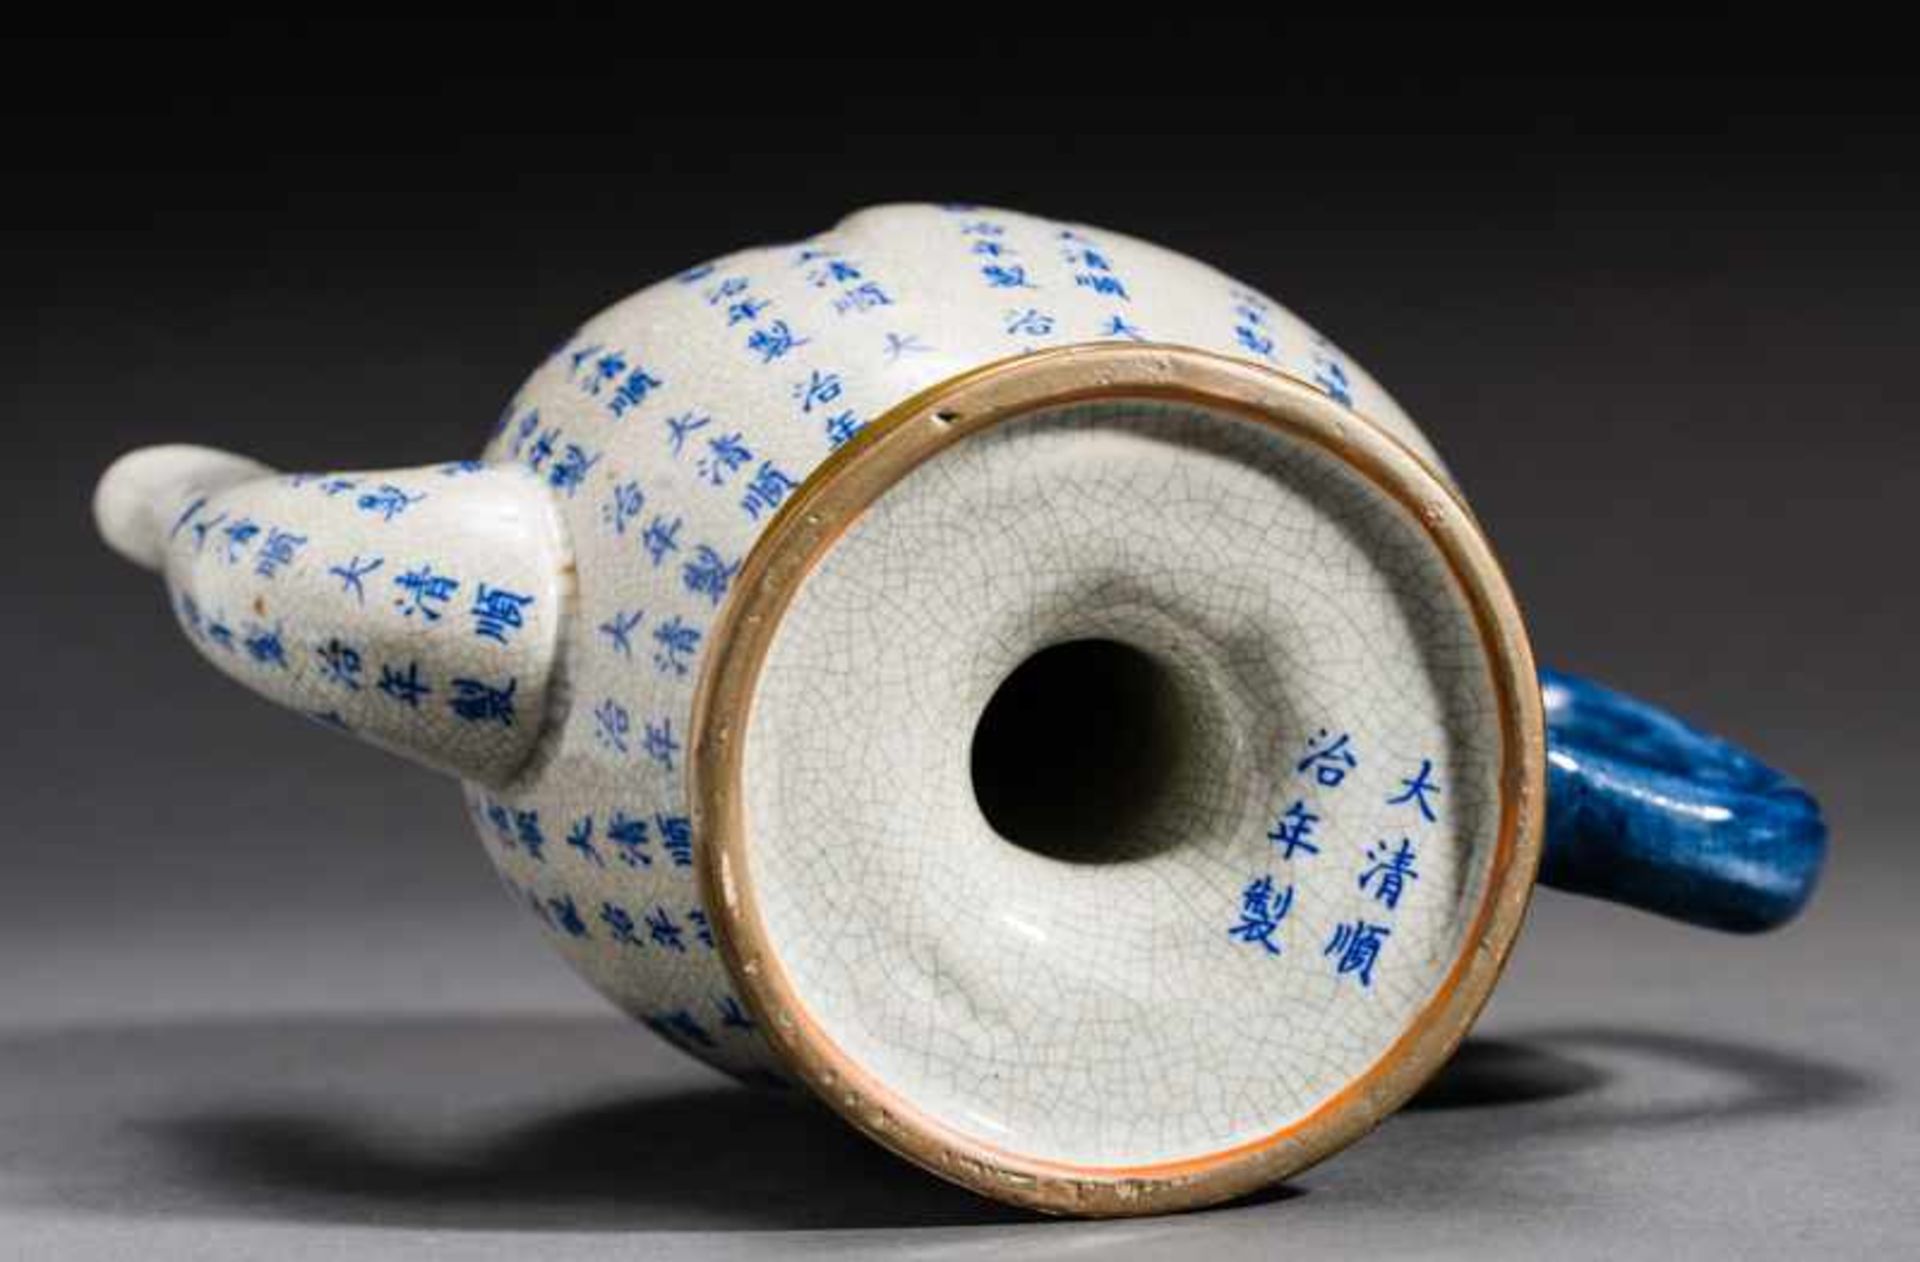 TEAPOT WITH CHINESE CHARACTERS Glazed ceramic and metal. China or Japan, 19th cent. to first half of - Image 6 of 6